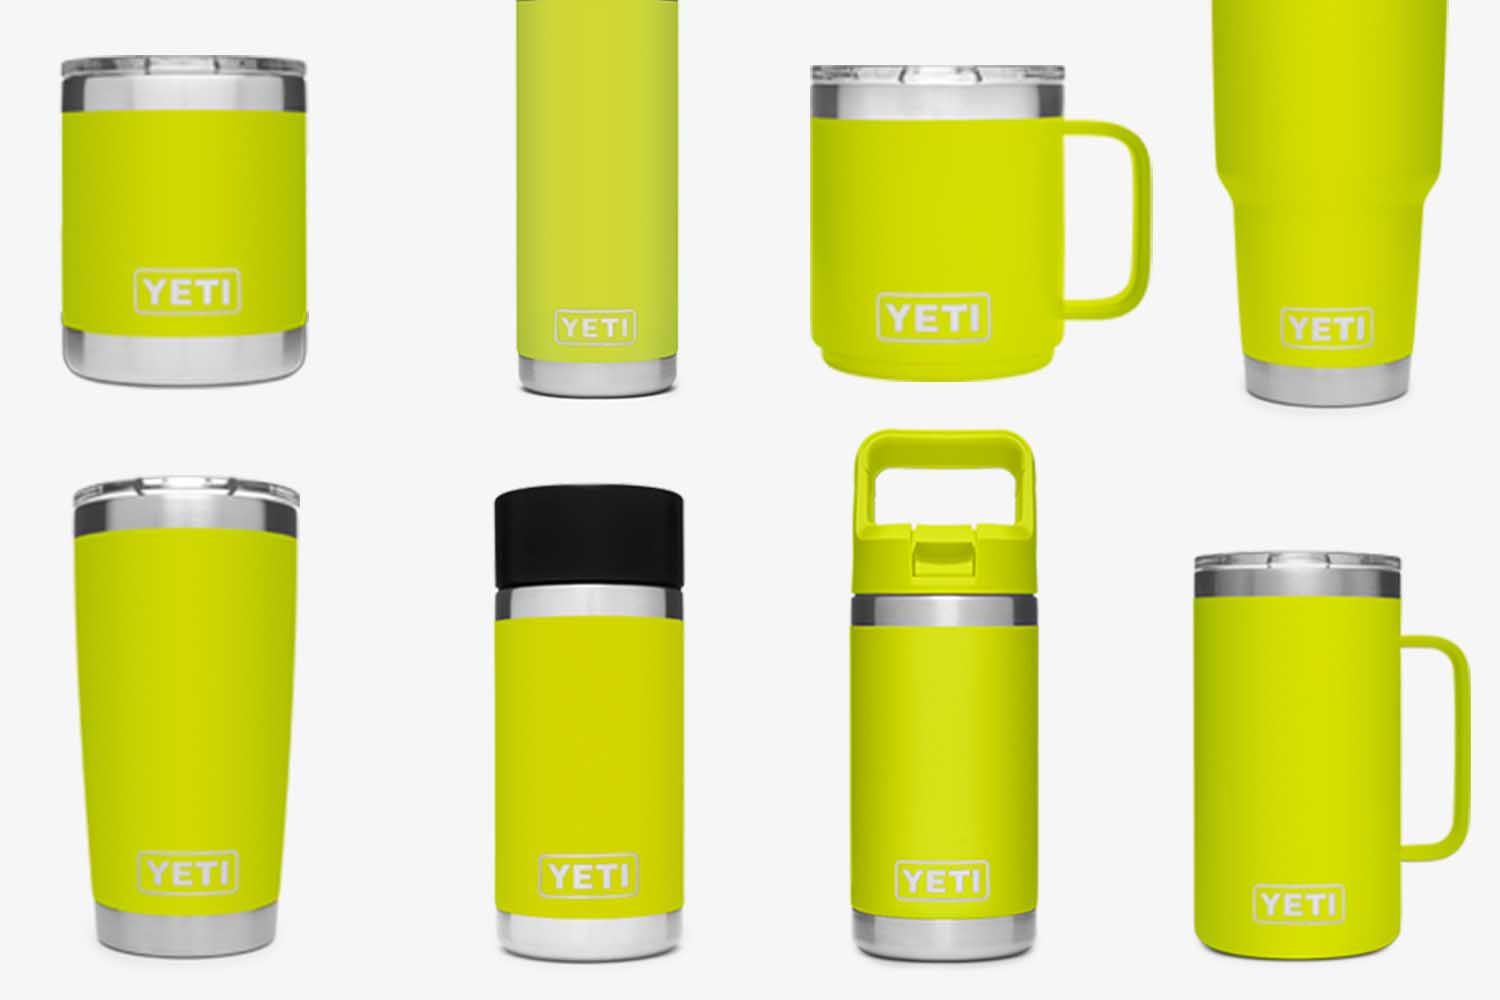 YETI Just Released a New Collection That's Going to Brighten Your